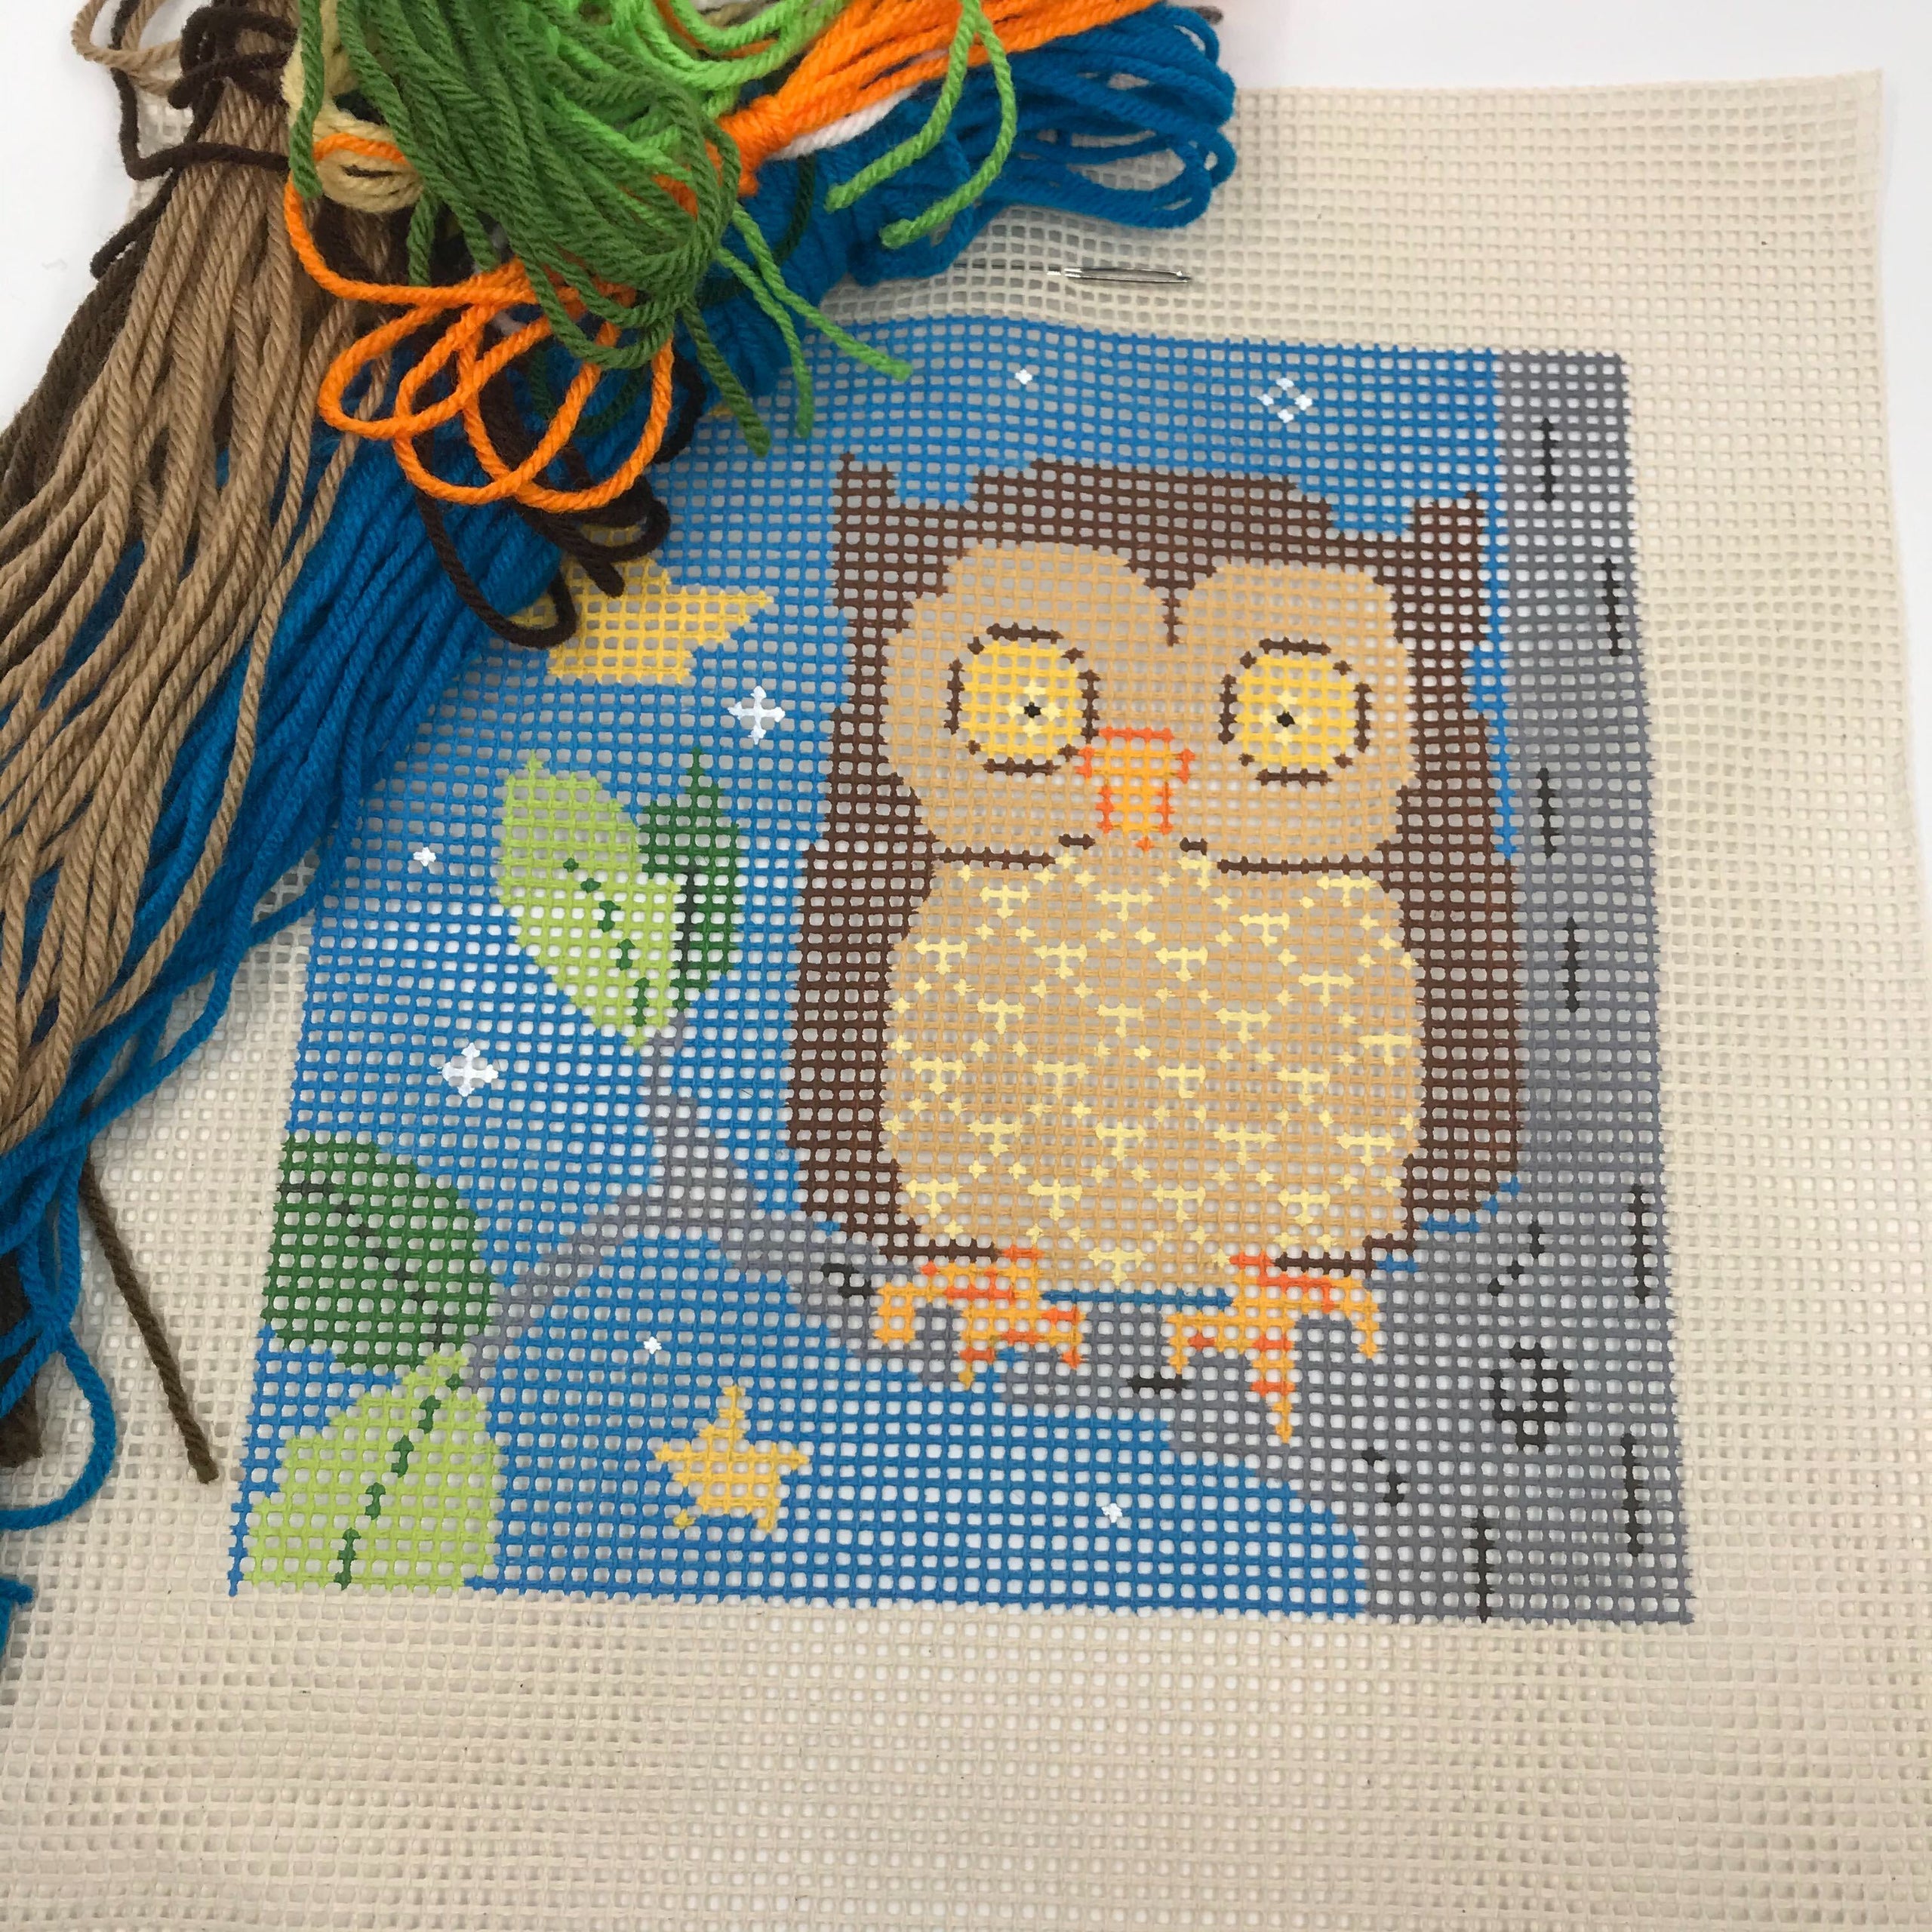 A beginner needlepoint kit of an owl which is suitable for kids